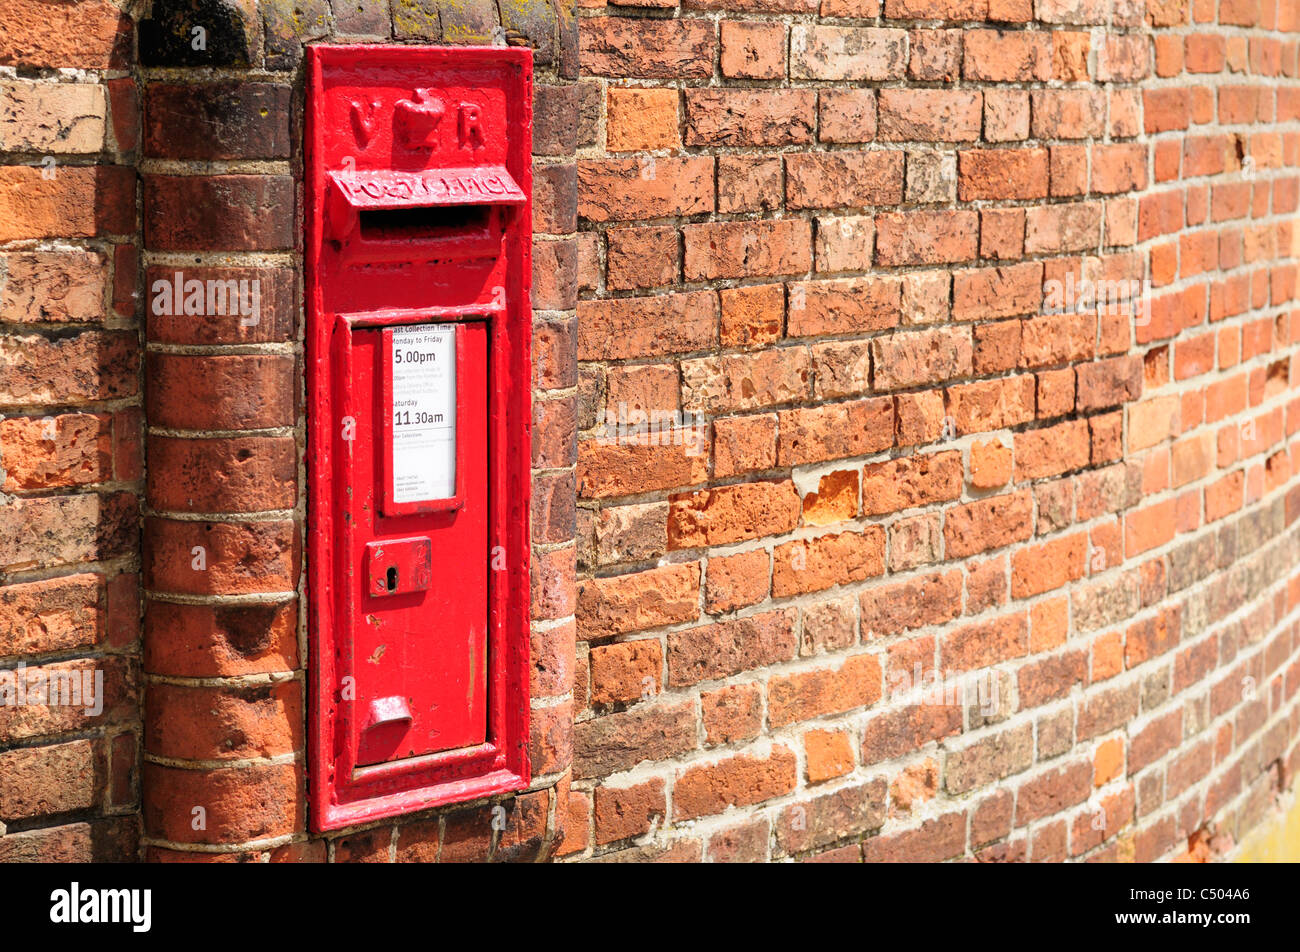 A Victorian Royal Mail postbox built into a brick wall in England. Stock Photo